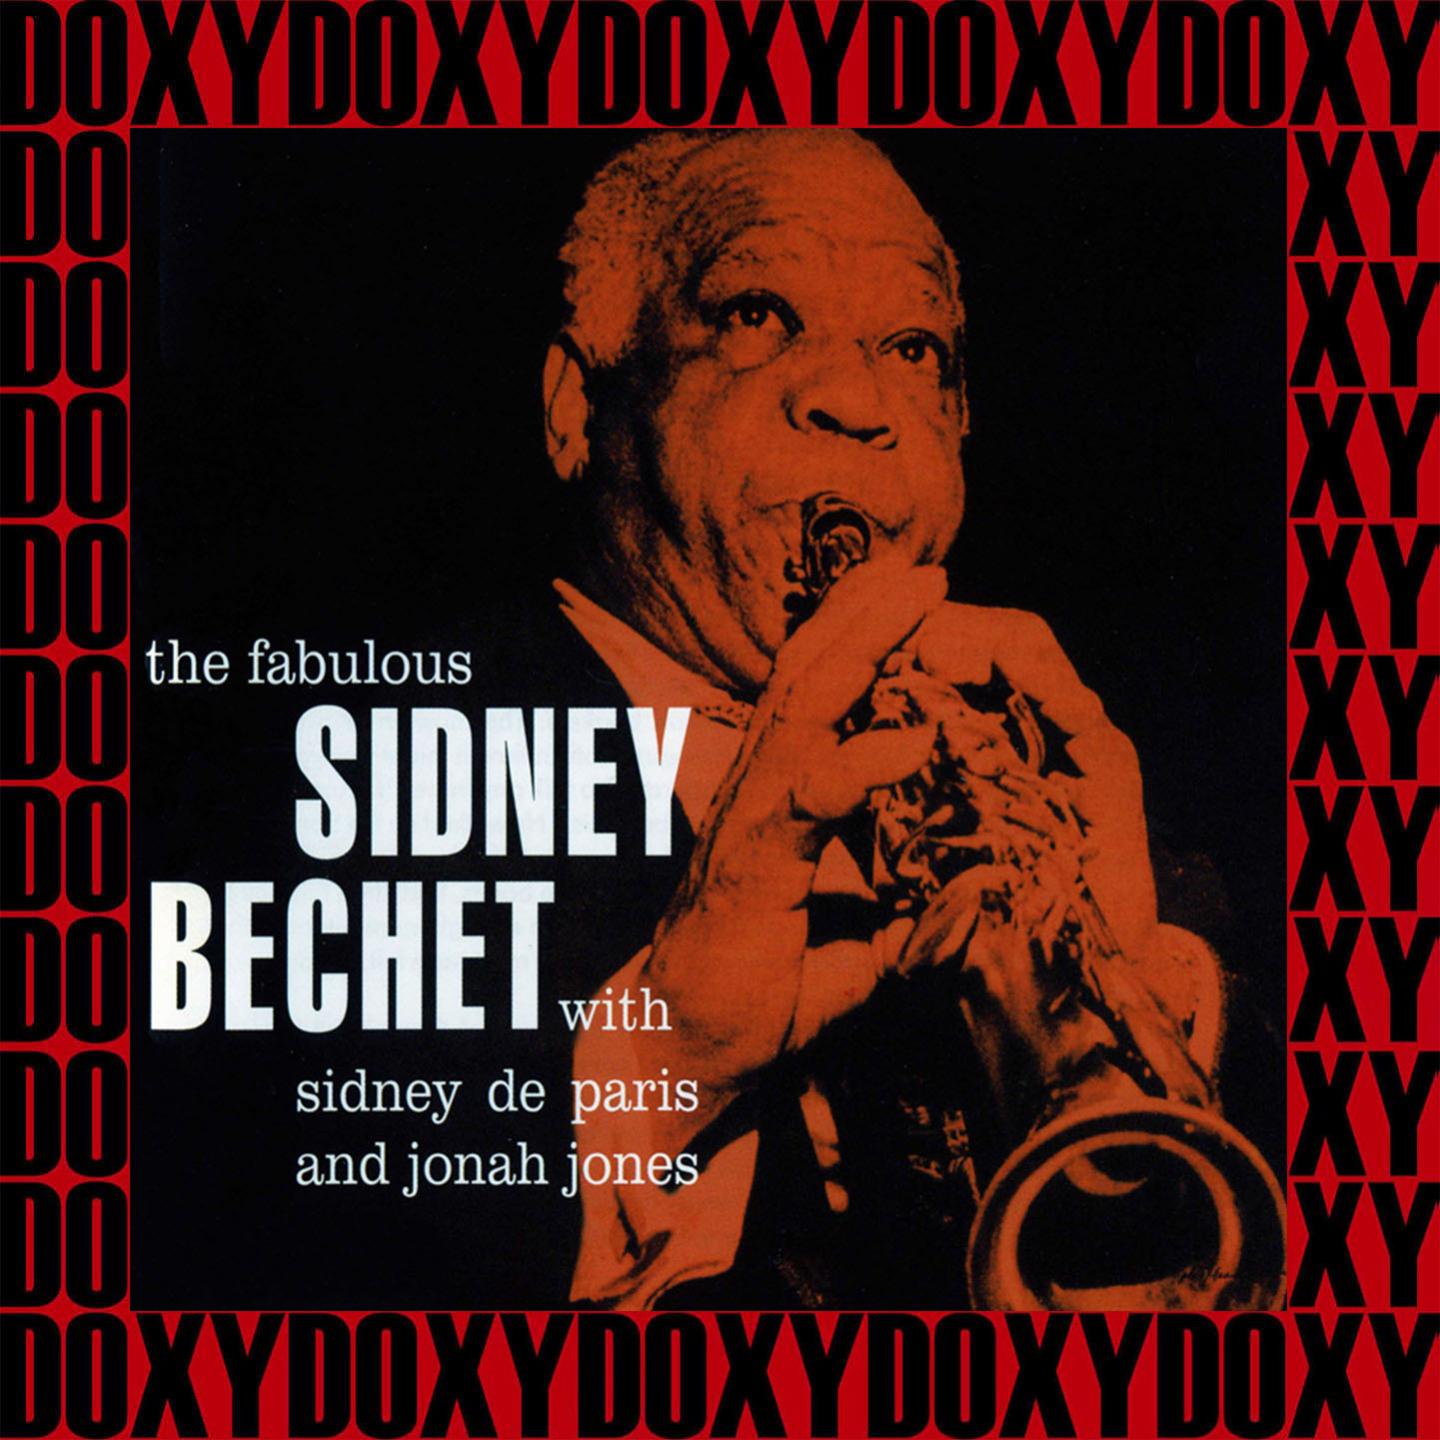 The Fabulous Sidney Bechet, The Complete Sessions (Remastered Version) (Doxy Collection)